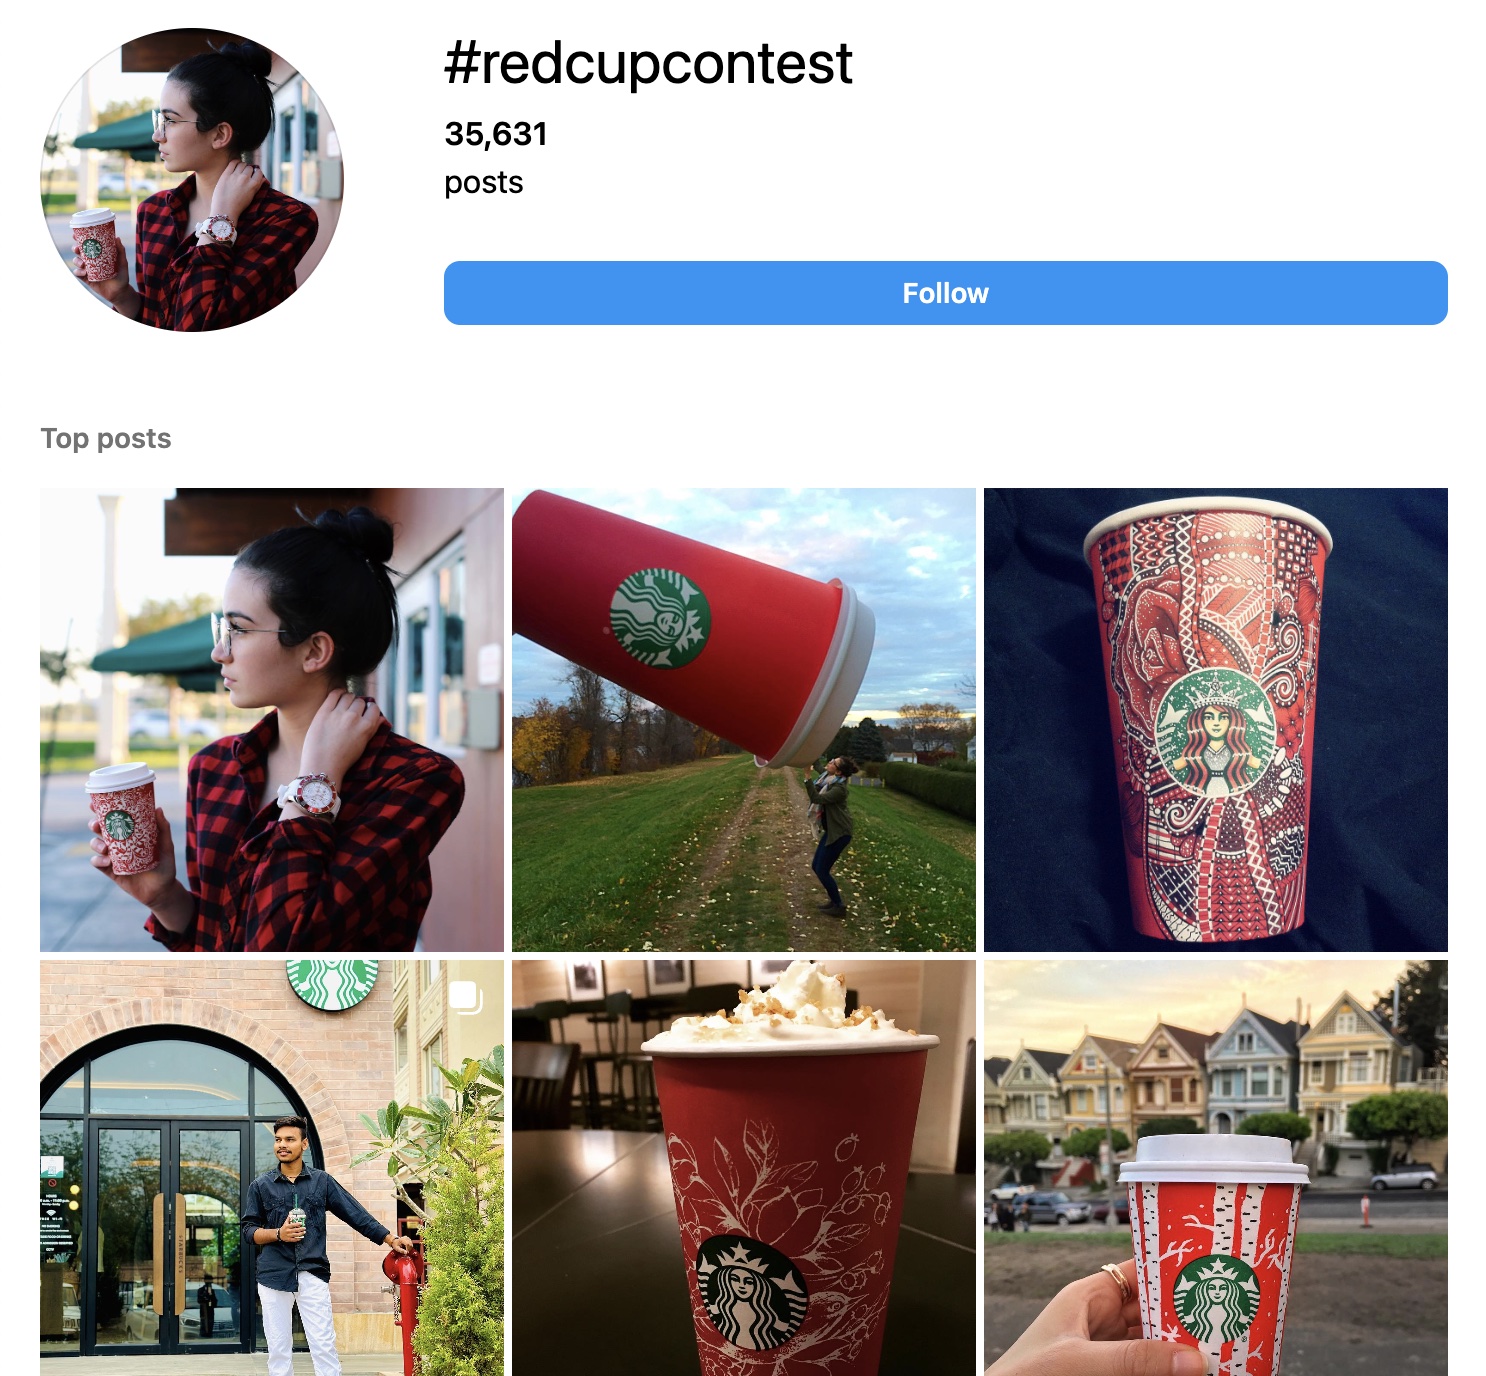 #RedCupContest page on Instagram